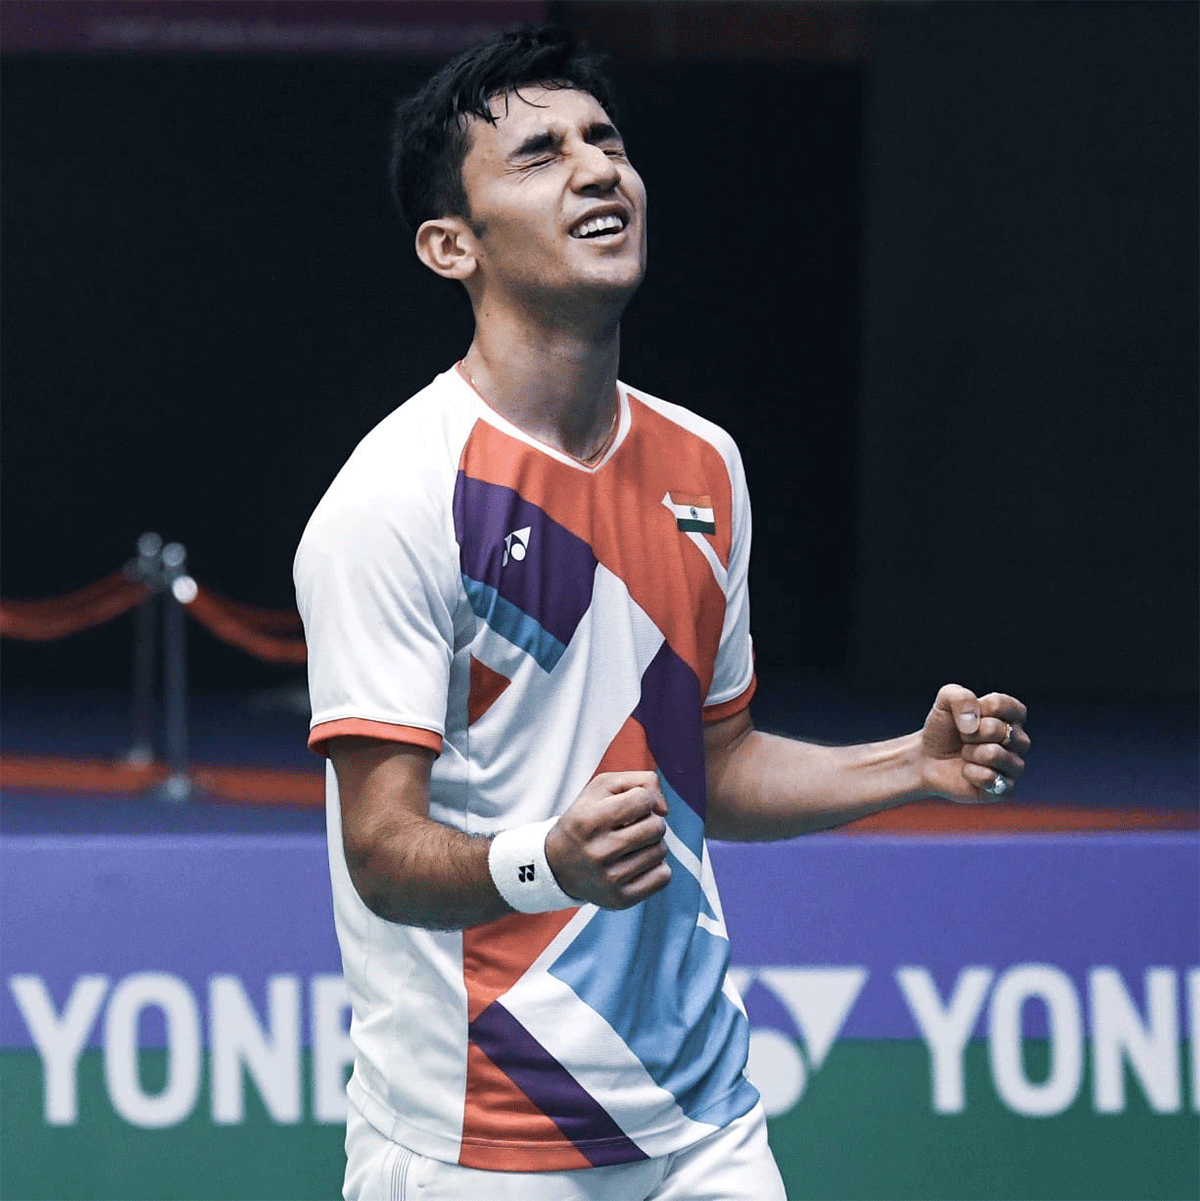 20-year-old Lakshya Sen celebrates after pulling off a major upset at the All England Championships in Birmingham on Thursday